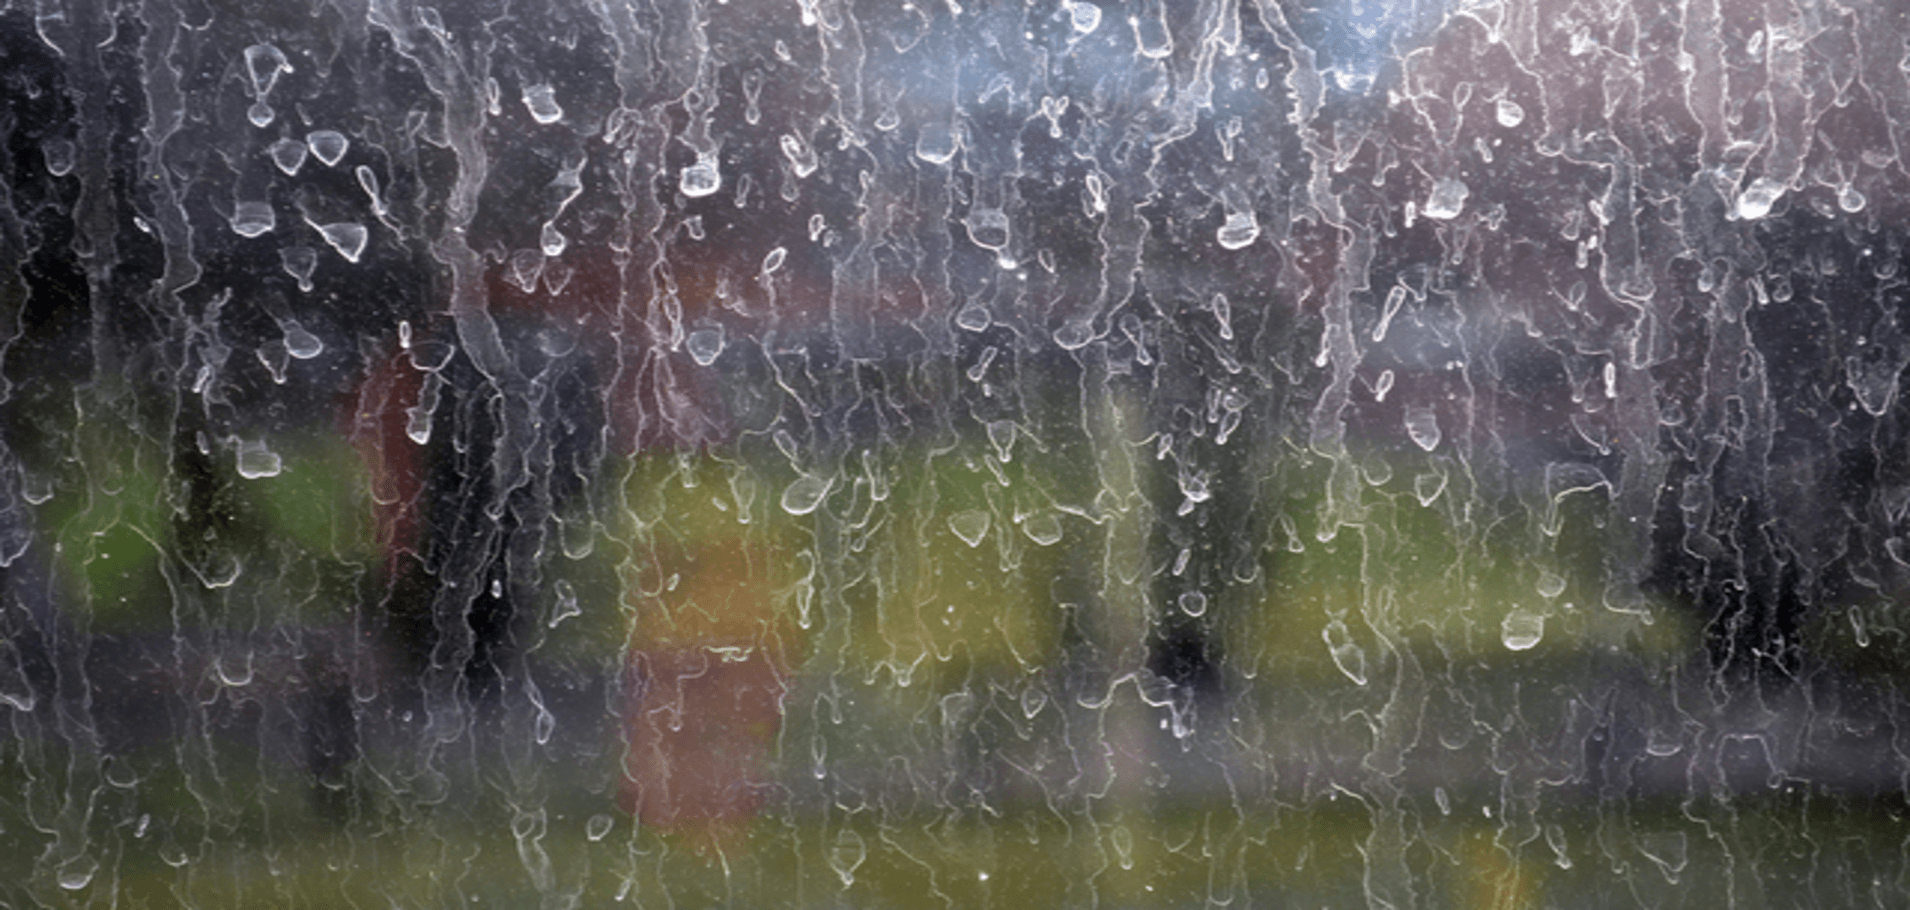 How often should you wash your windows?